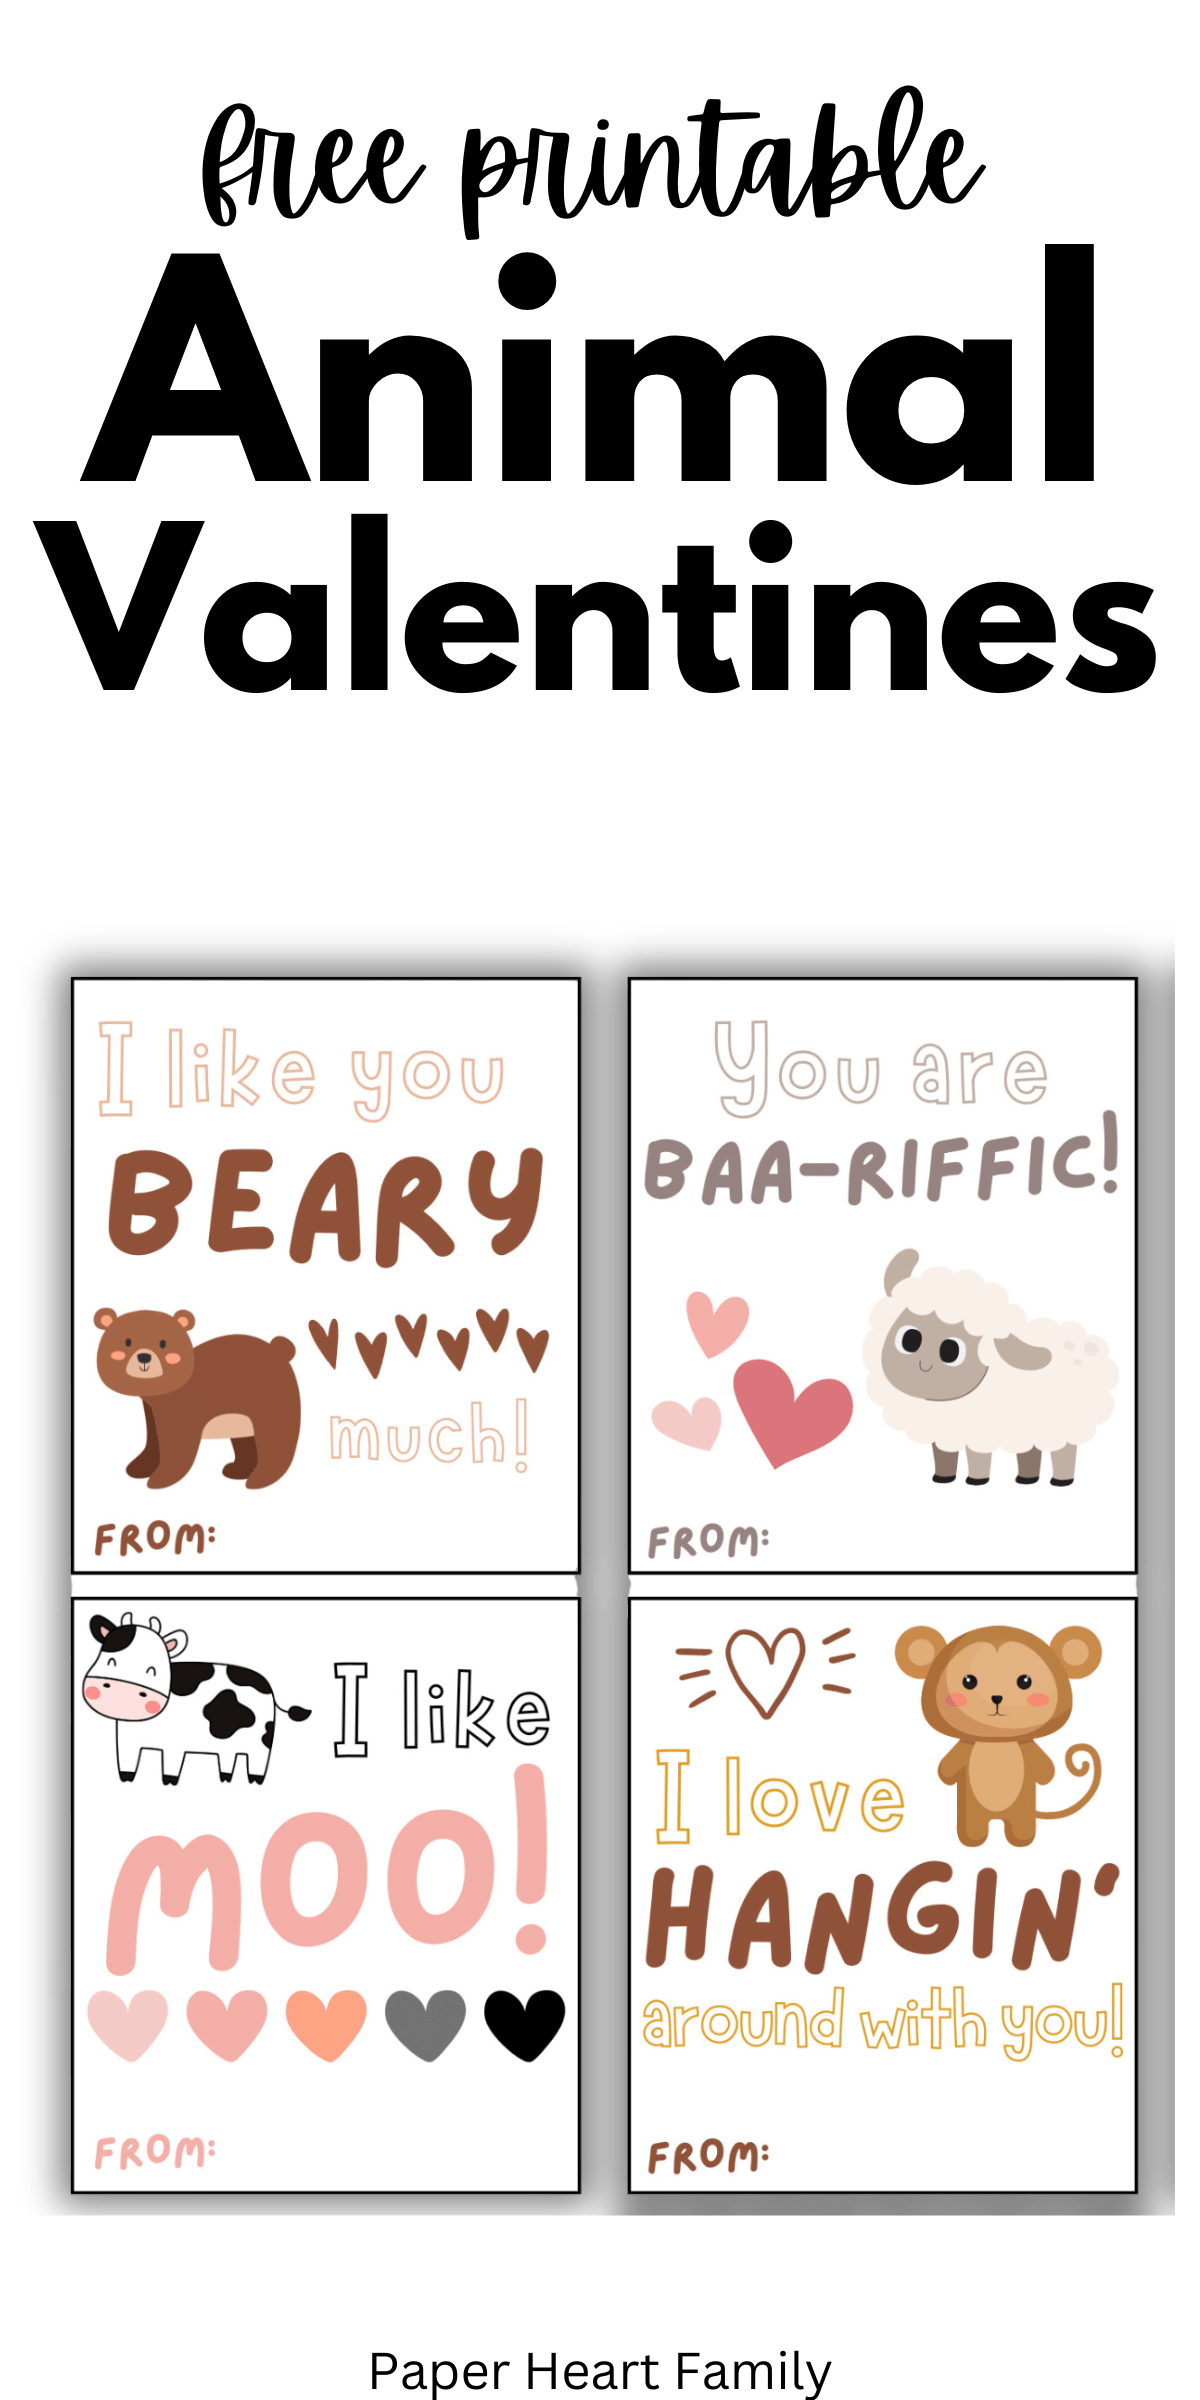 Bear, Sheep, Cow and Monkey Valentines with punny sayings